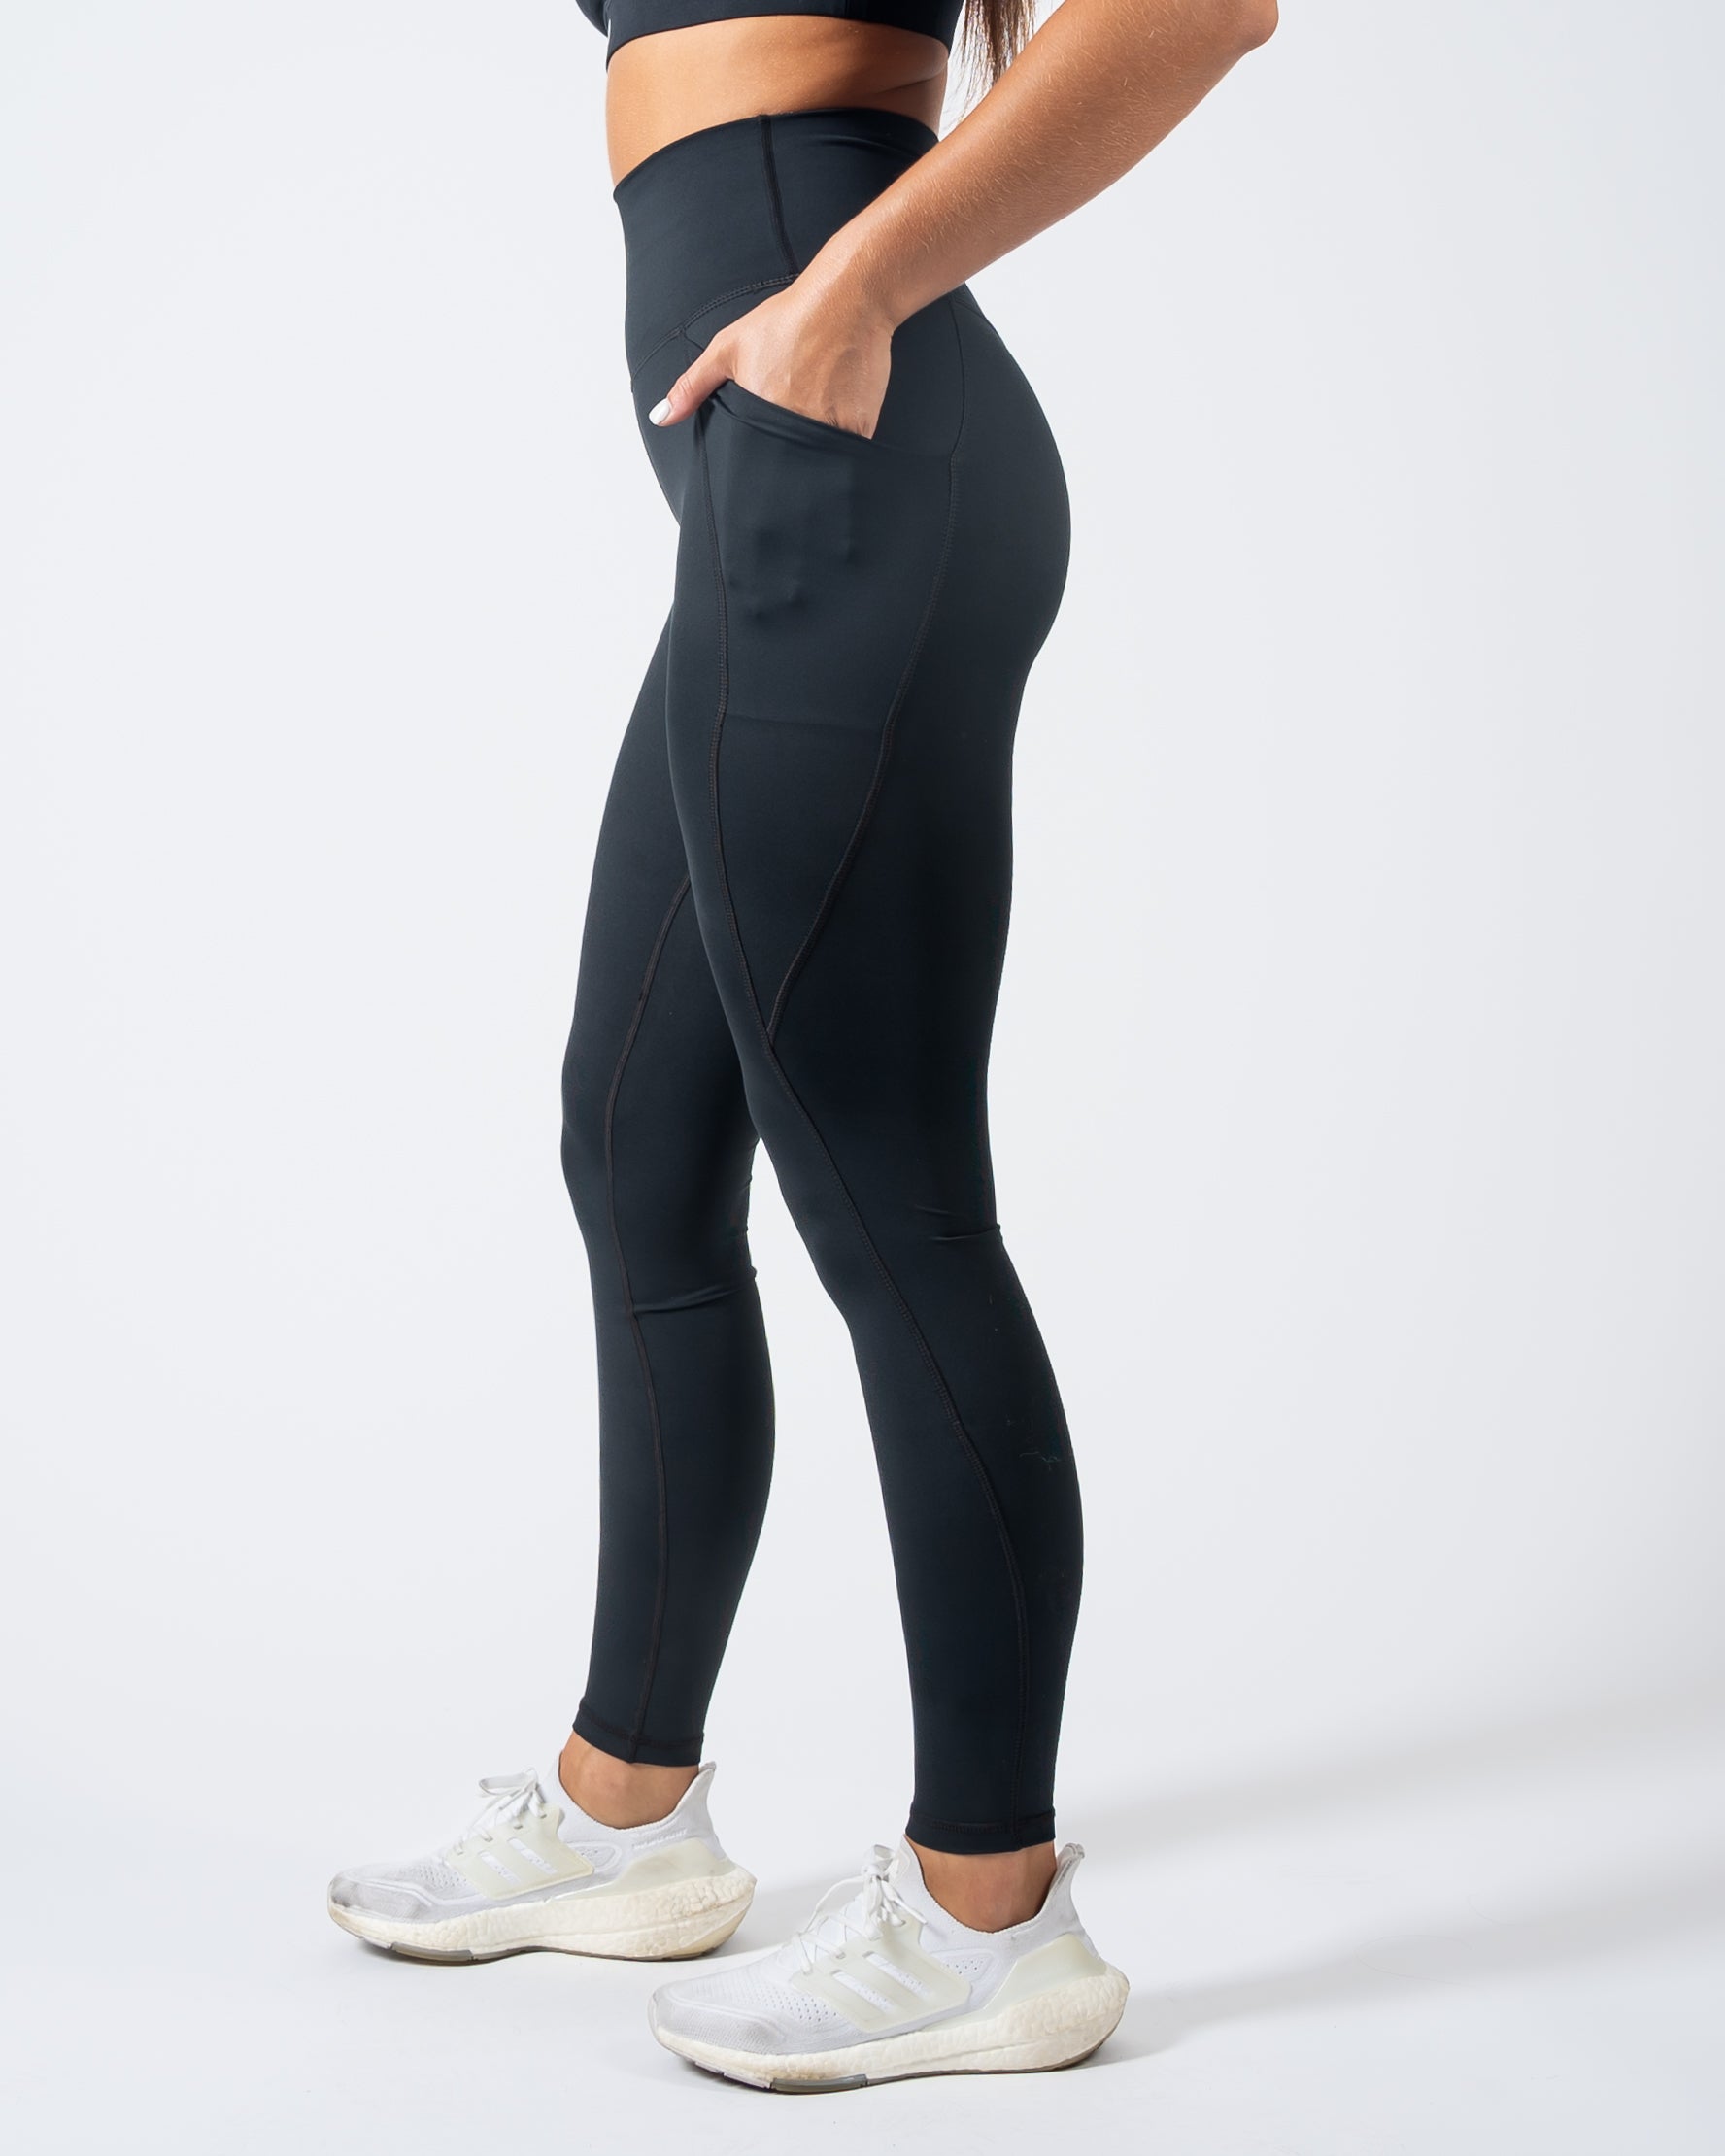 Senita Athletics - Our pick for Outfit of the Week is The Harmony Crop  Top - Black with the Tricolor Lux Leggings - Black, Jungle, Mint! ✨ I  mean c'mon! 😍 Name